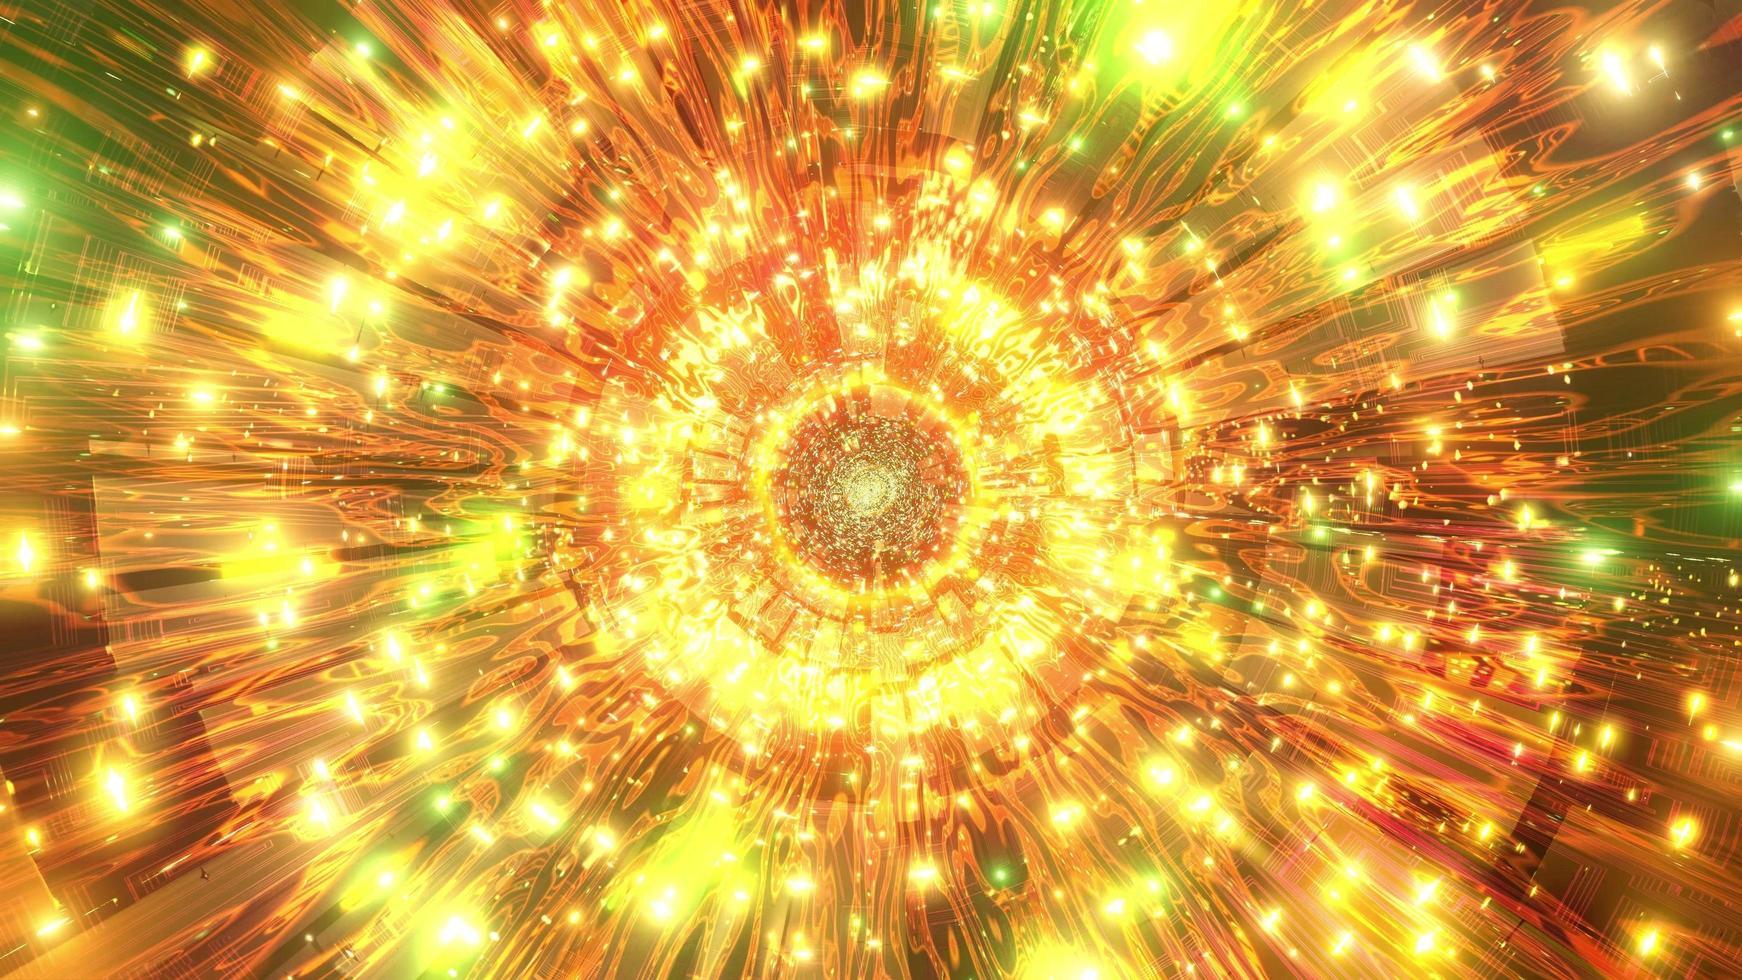 Green and orange lights and shapes in kaleidoscope 3d illustration for background or wallpaper photo